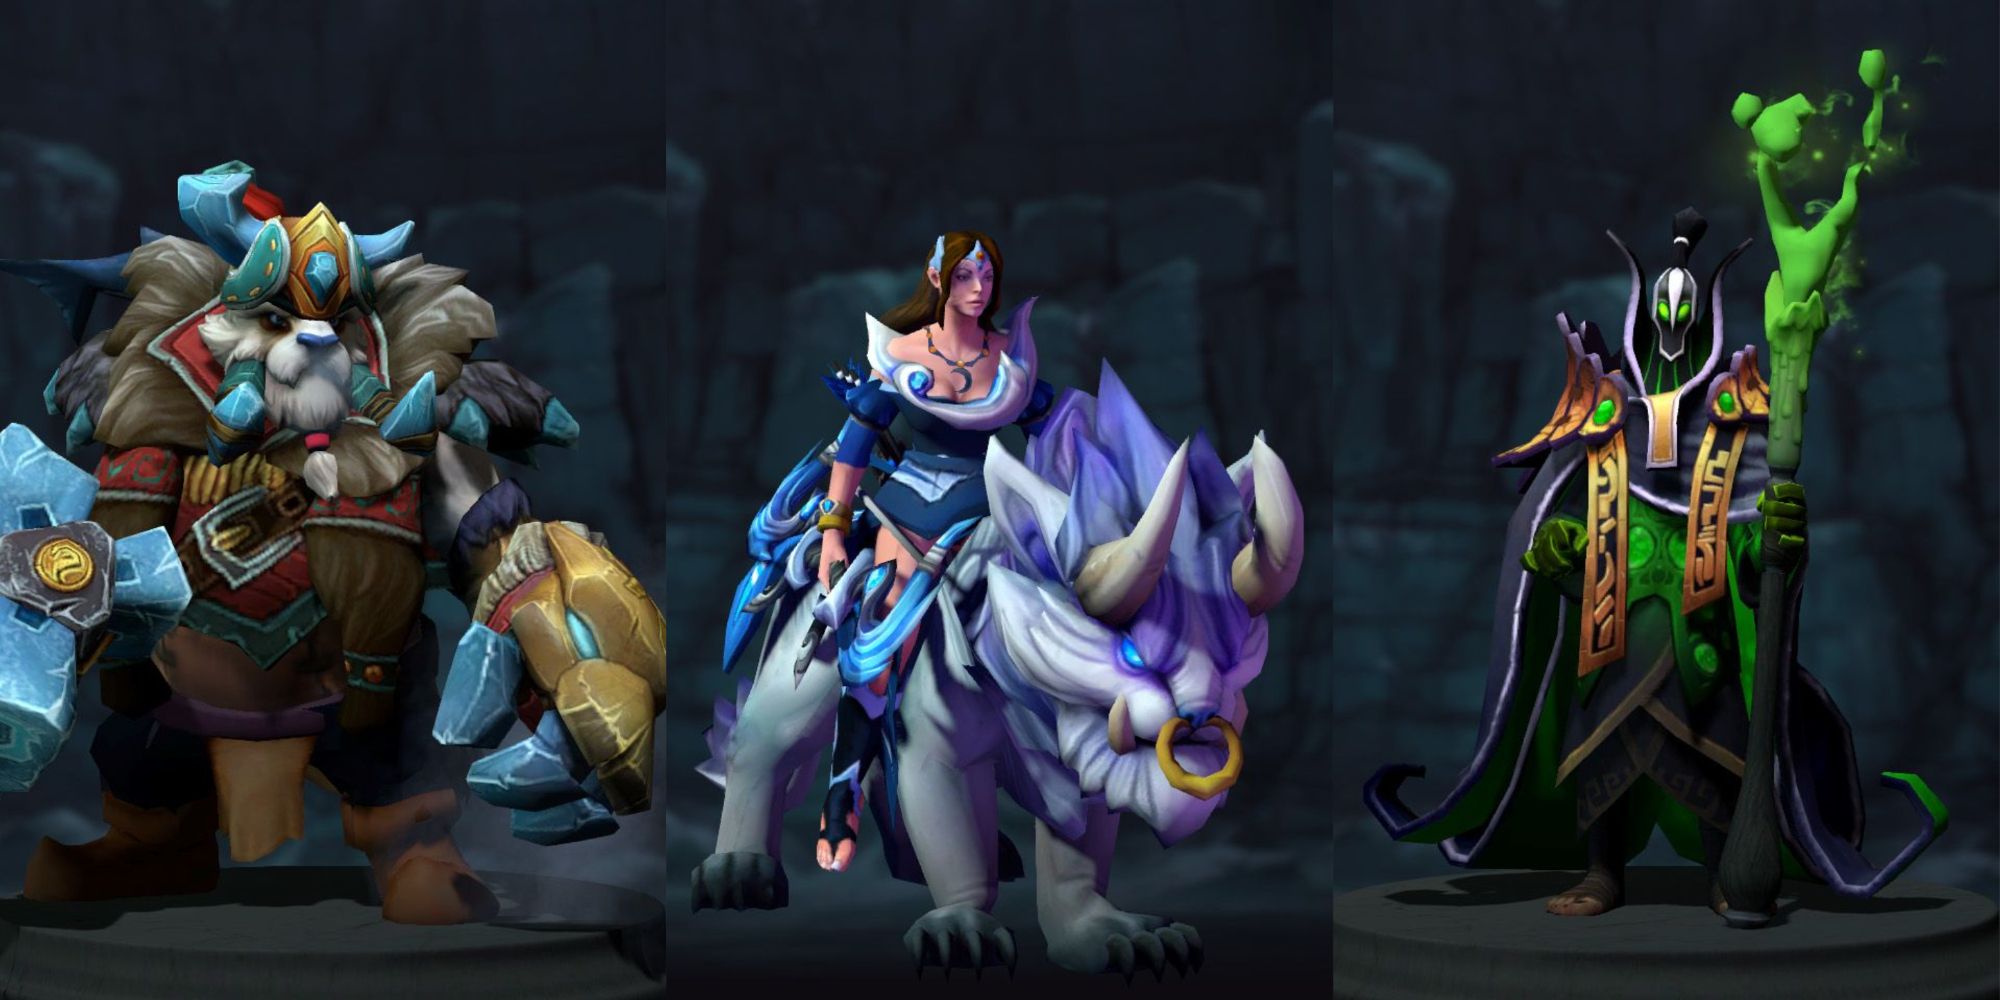 Rubik, Tusk, Mirana character models in Dota 2 feature best supports